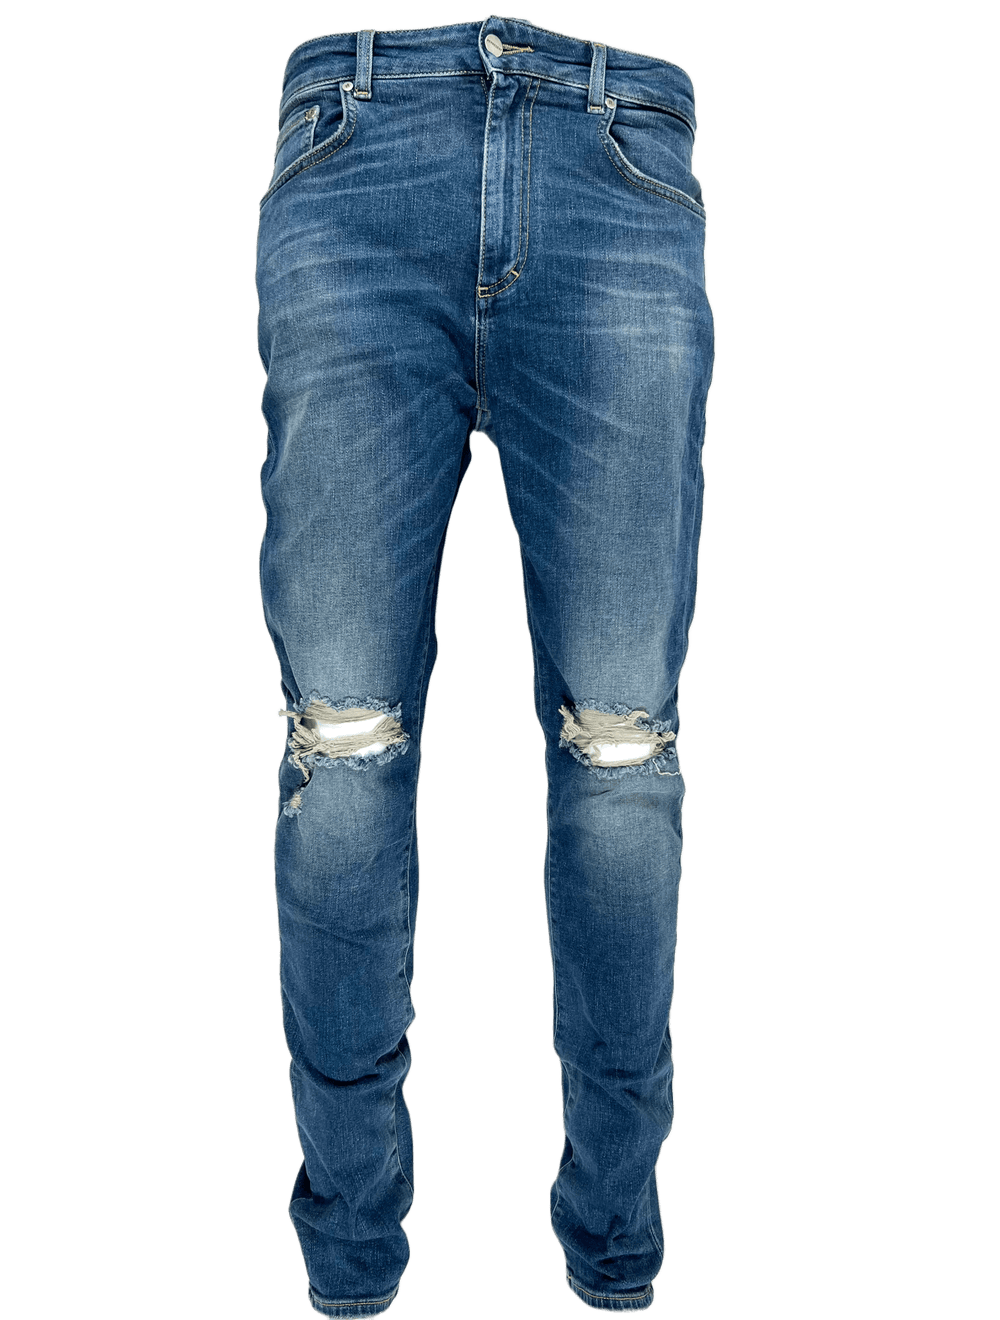 A pair of men's REPRESENT M07044 DESTROYER DENIM CLASSIC BLUE FW22 with distressed detailing and holes on the knees.